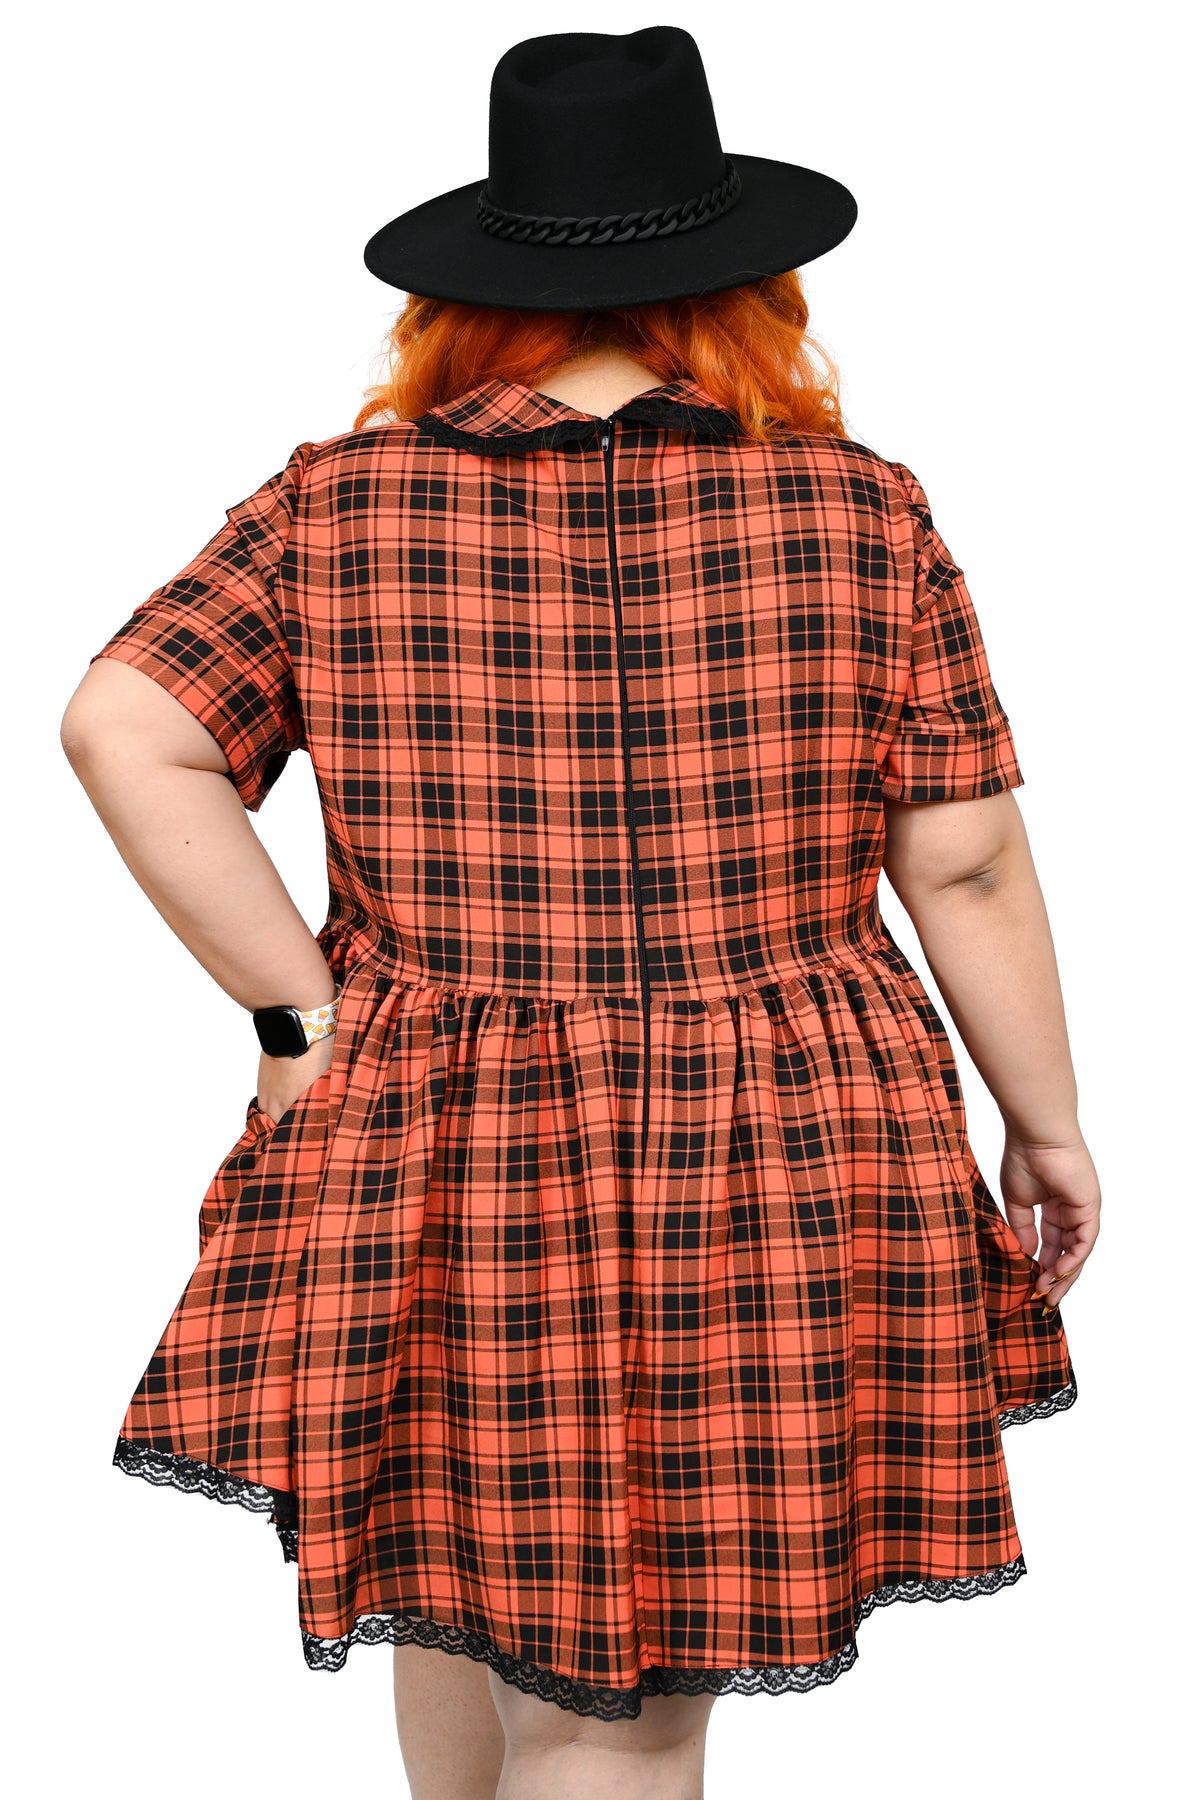 This orange plaid swing dress has a pointed collar with lace trim, and the same trim on the bottom hem. Under the collar there is an adjustable ribbon. Zipper on the back